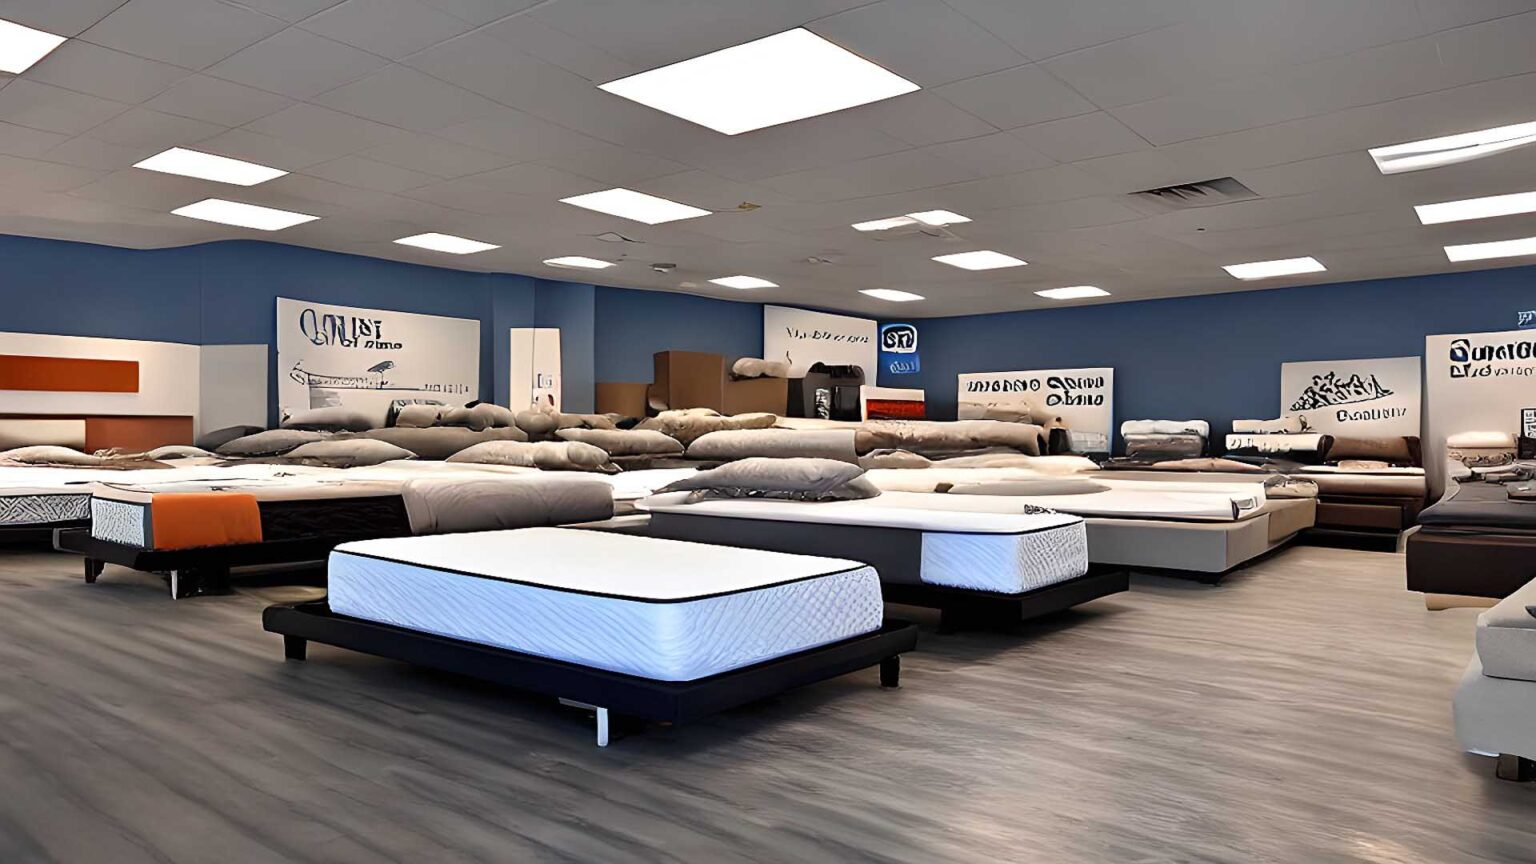 Mattress Stores, mattress dealers, and mattress retailers near me in Fort Smith, AR